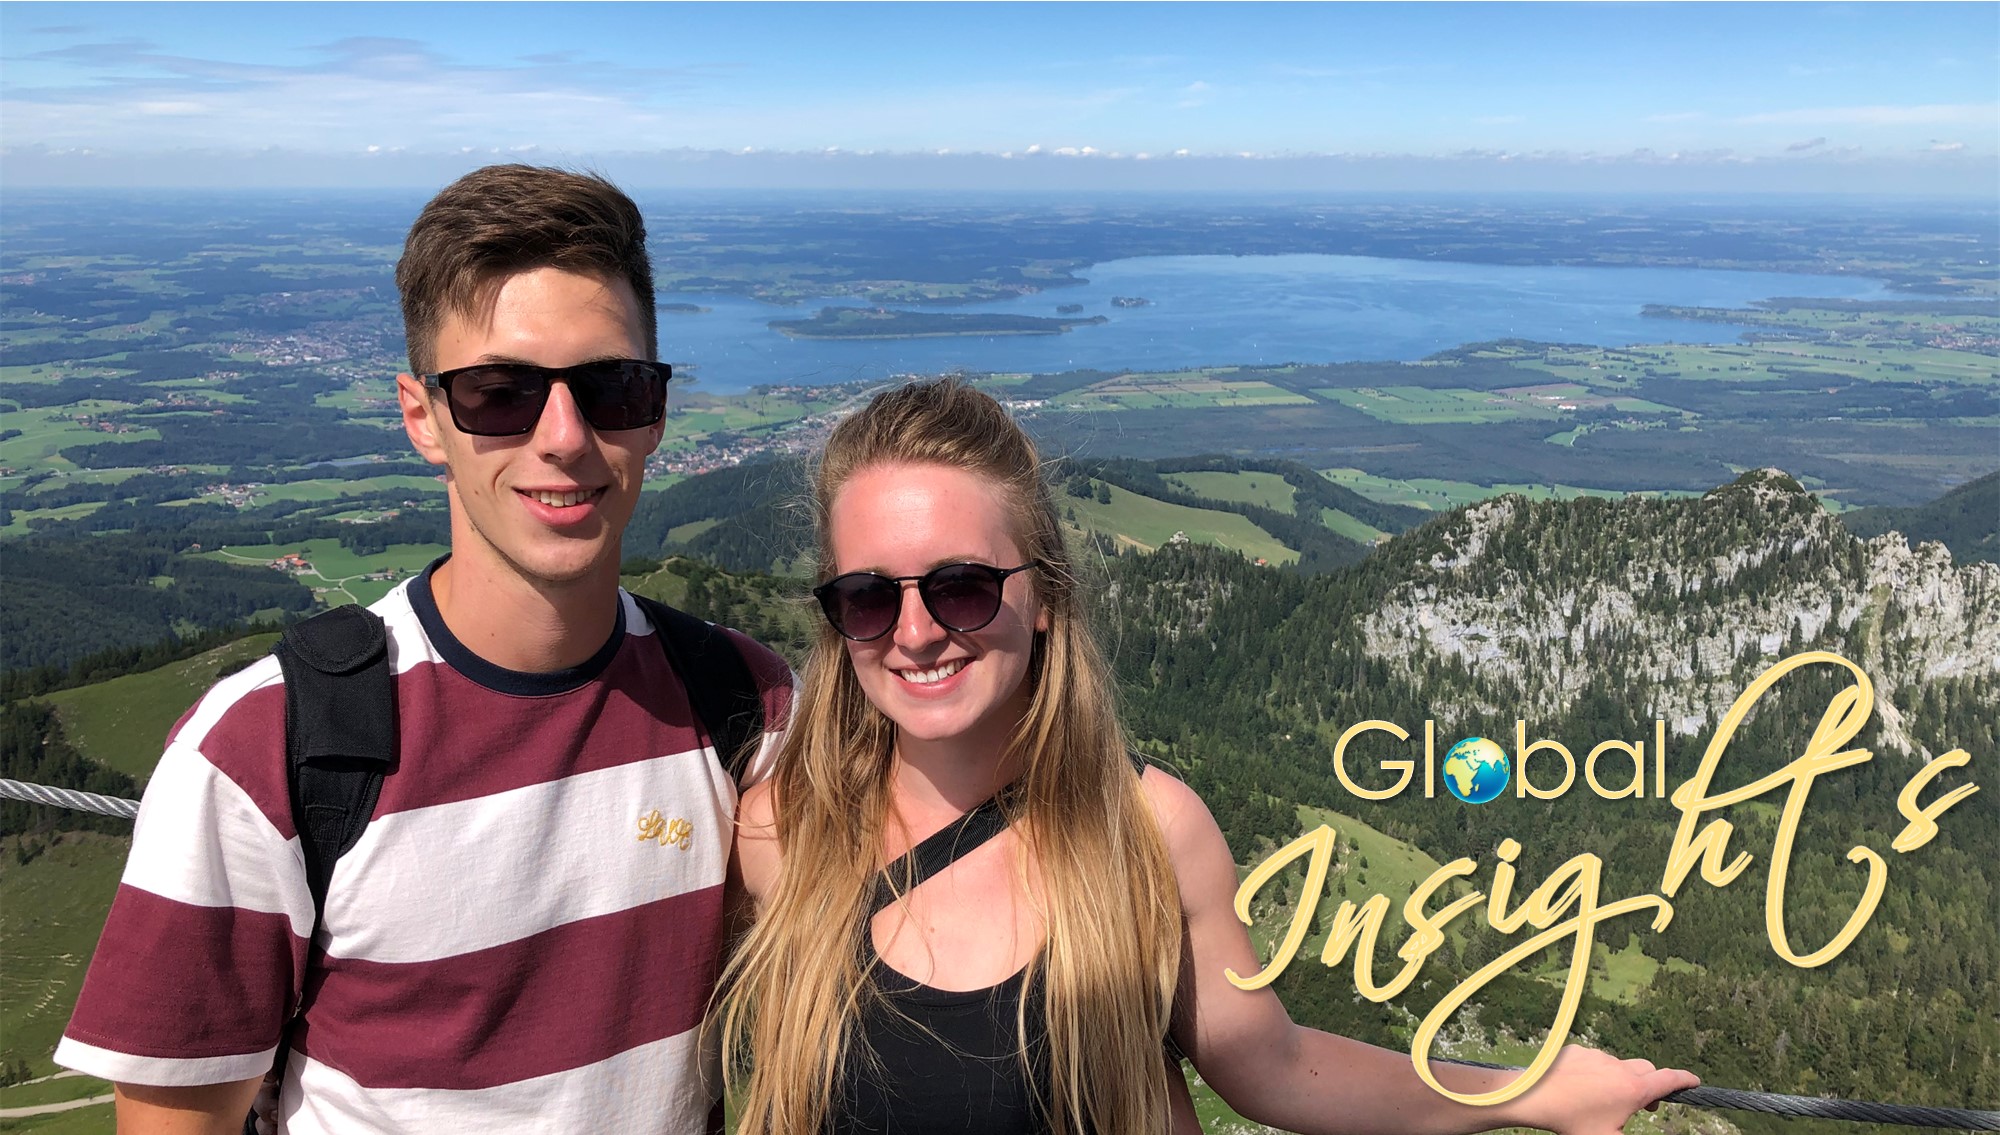 Fulbright Scholar Joshua Hartmann and friend, in Germany, overlooking the Chiemsee, a freshwater lake in Bavaria also known as the Bavarian Sea.